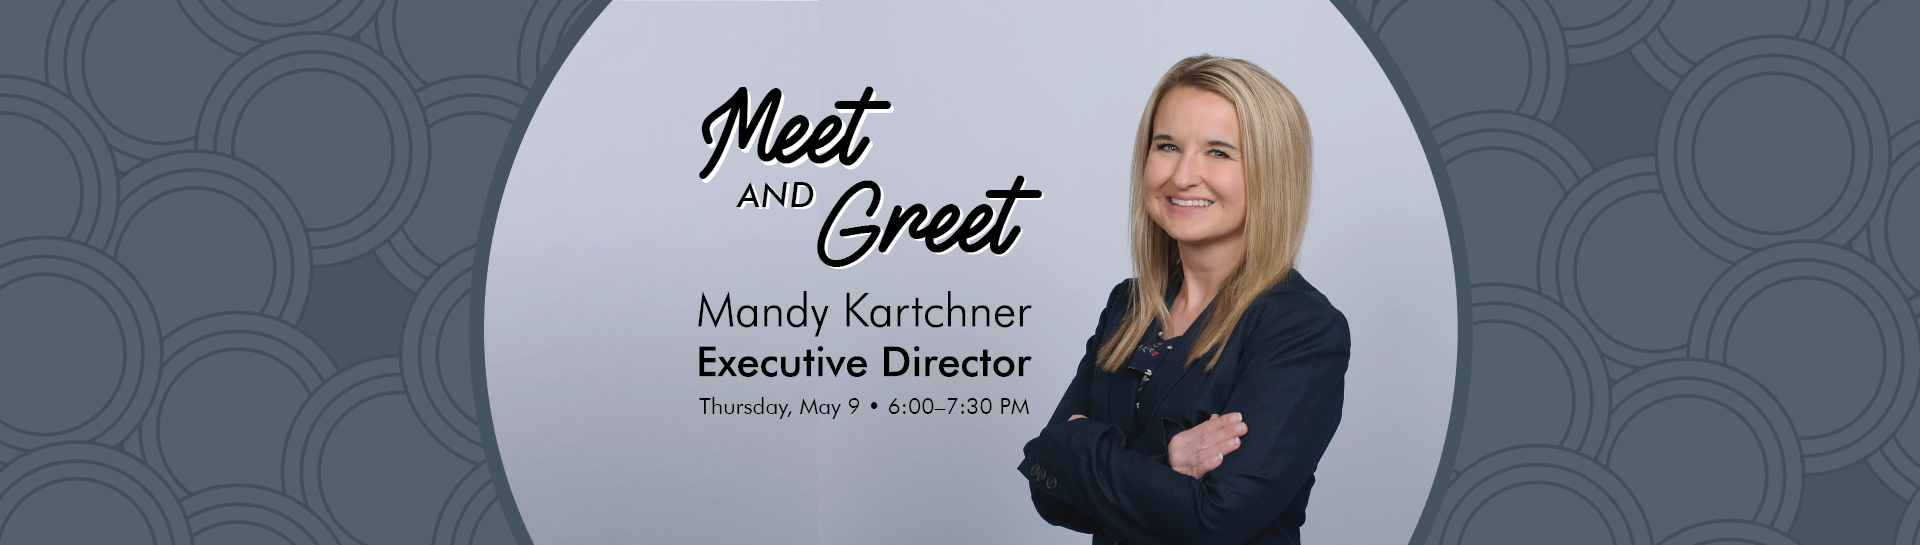 Meet and Greet with Mandy Kartchner